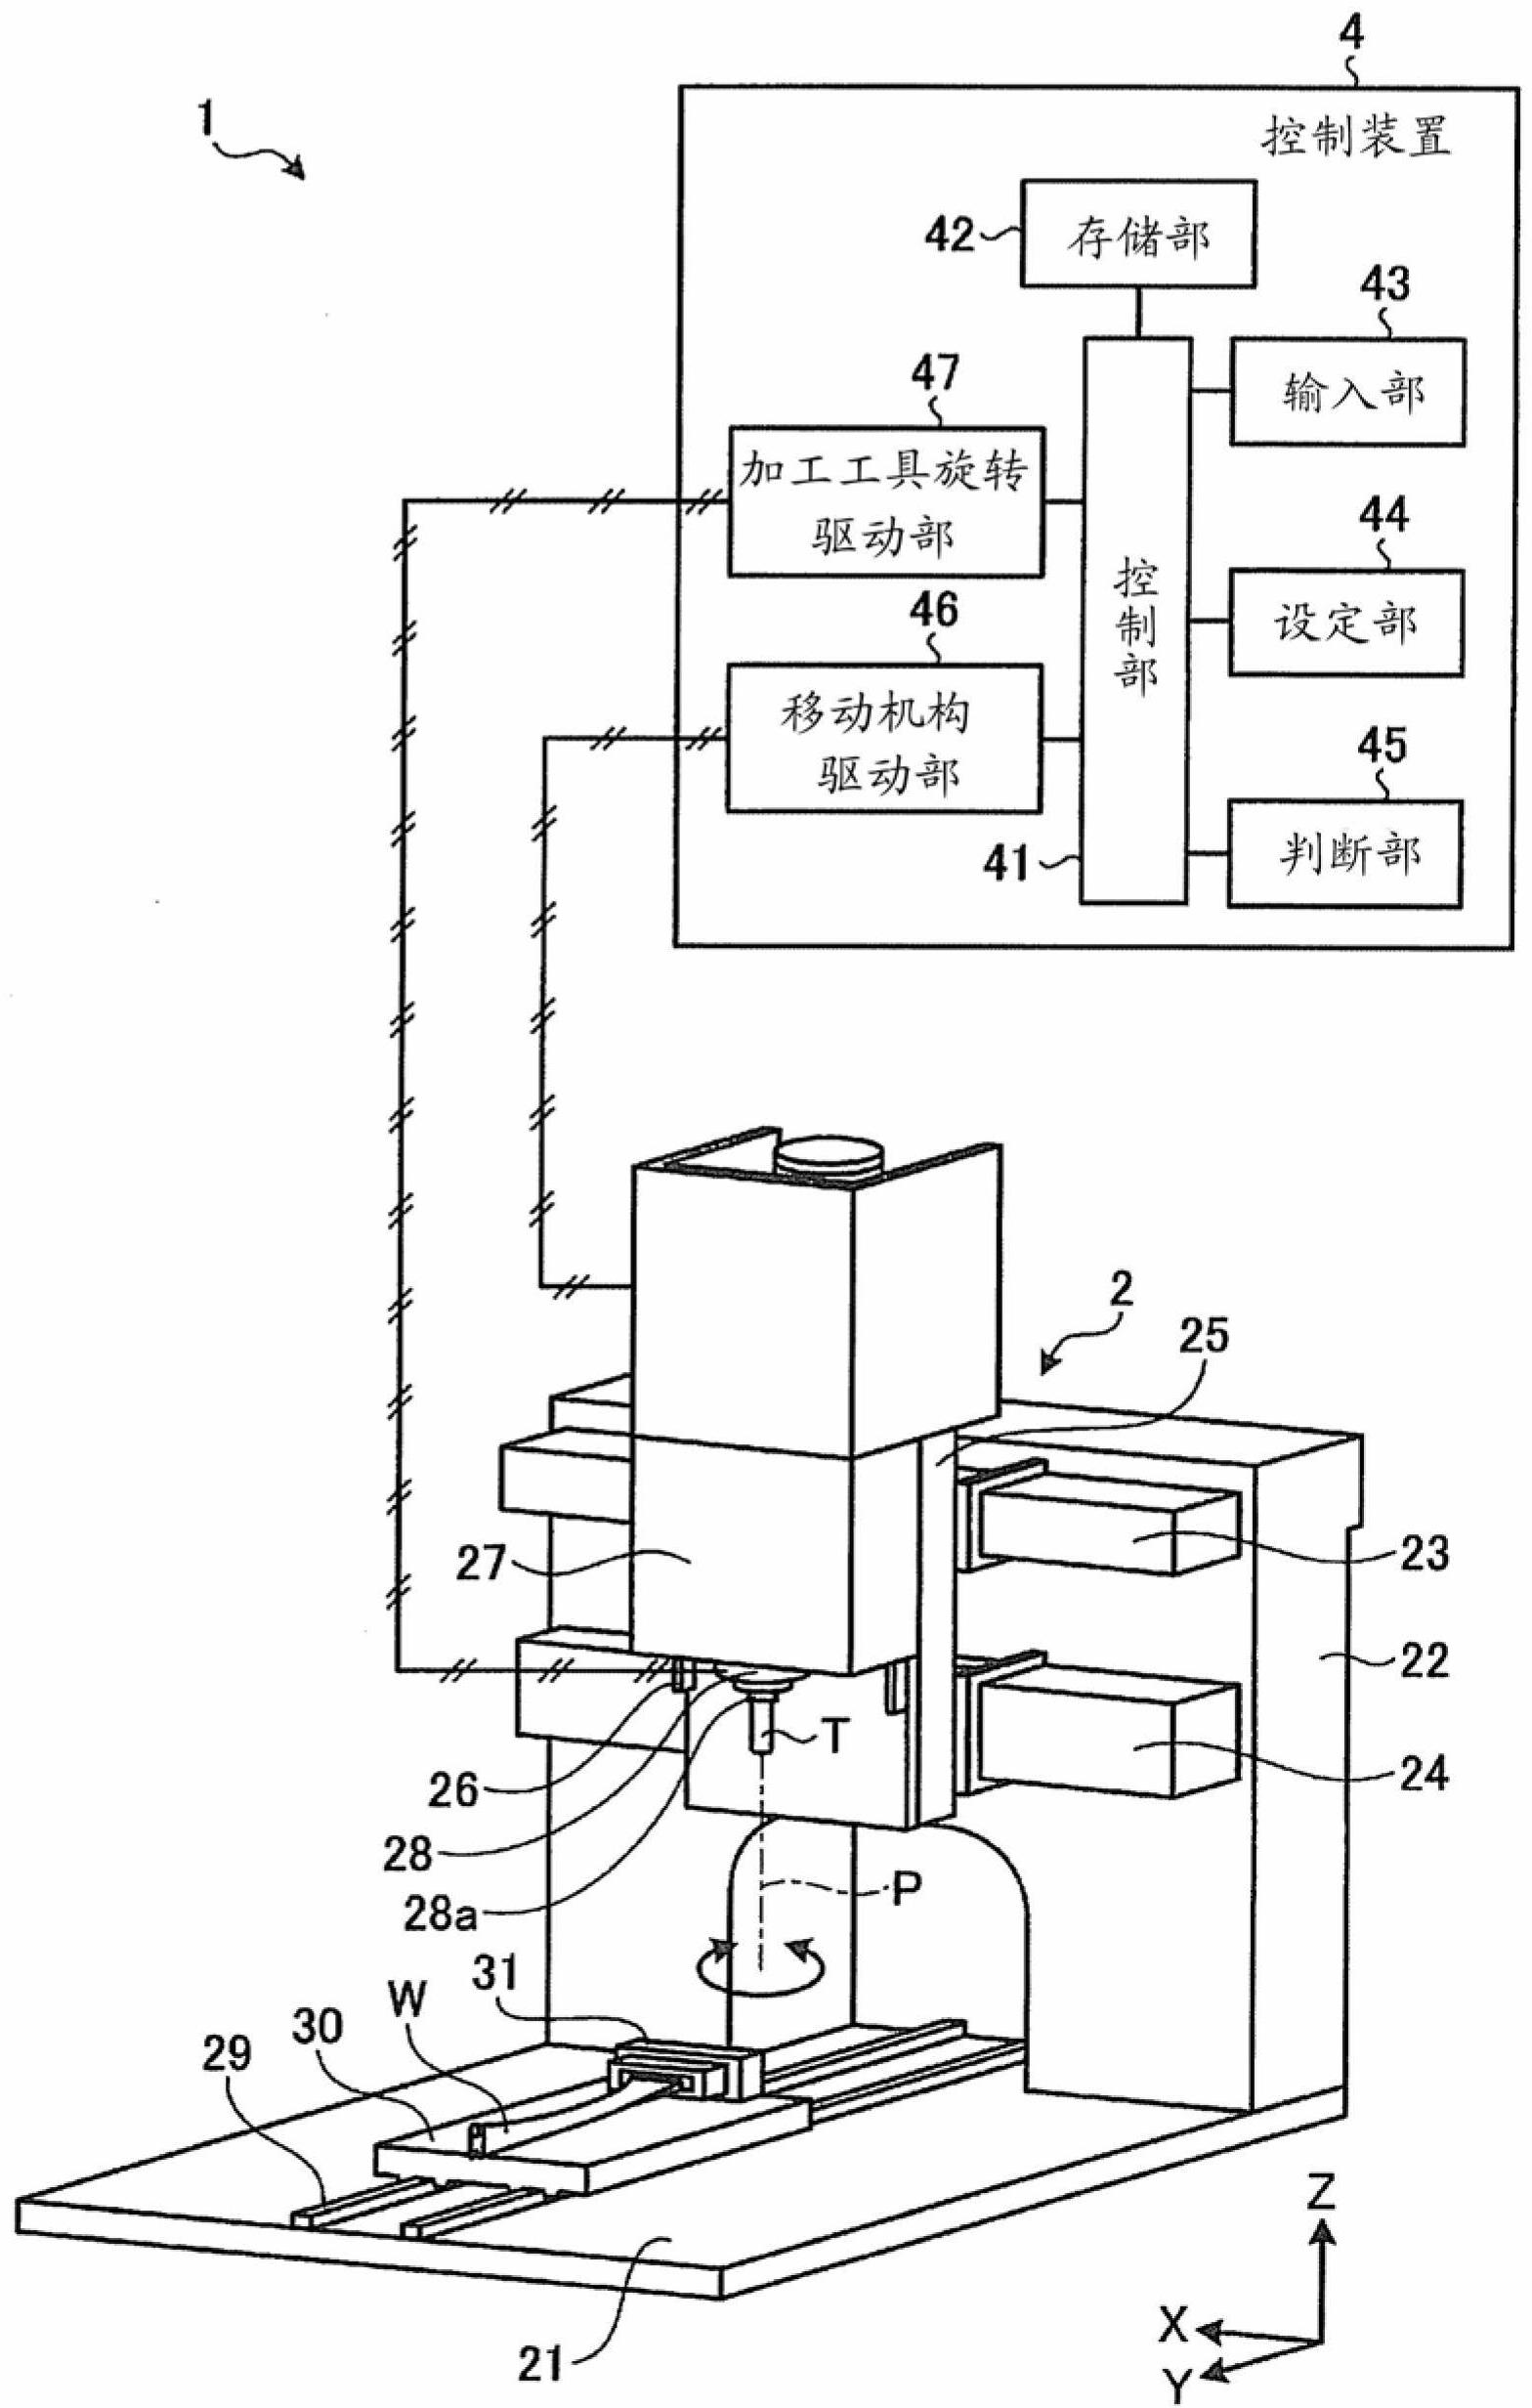 Machine tool control method and control device